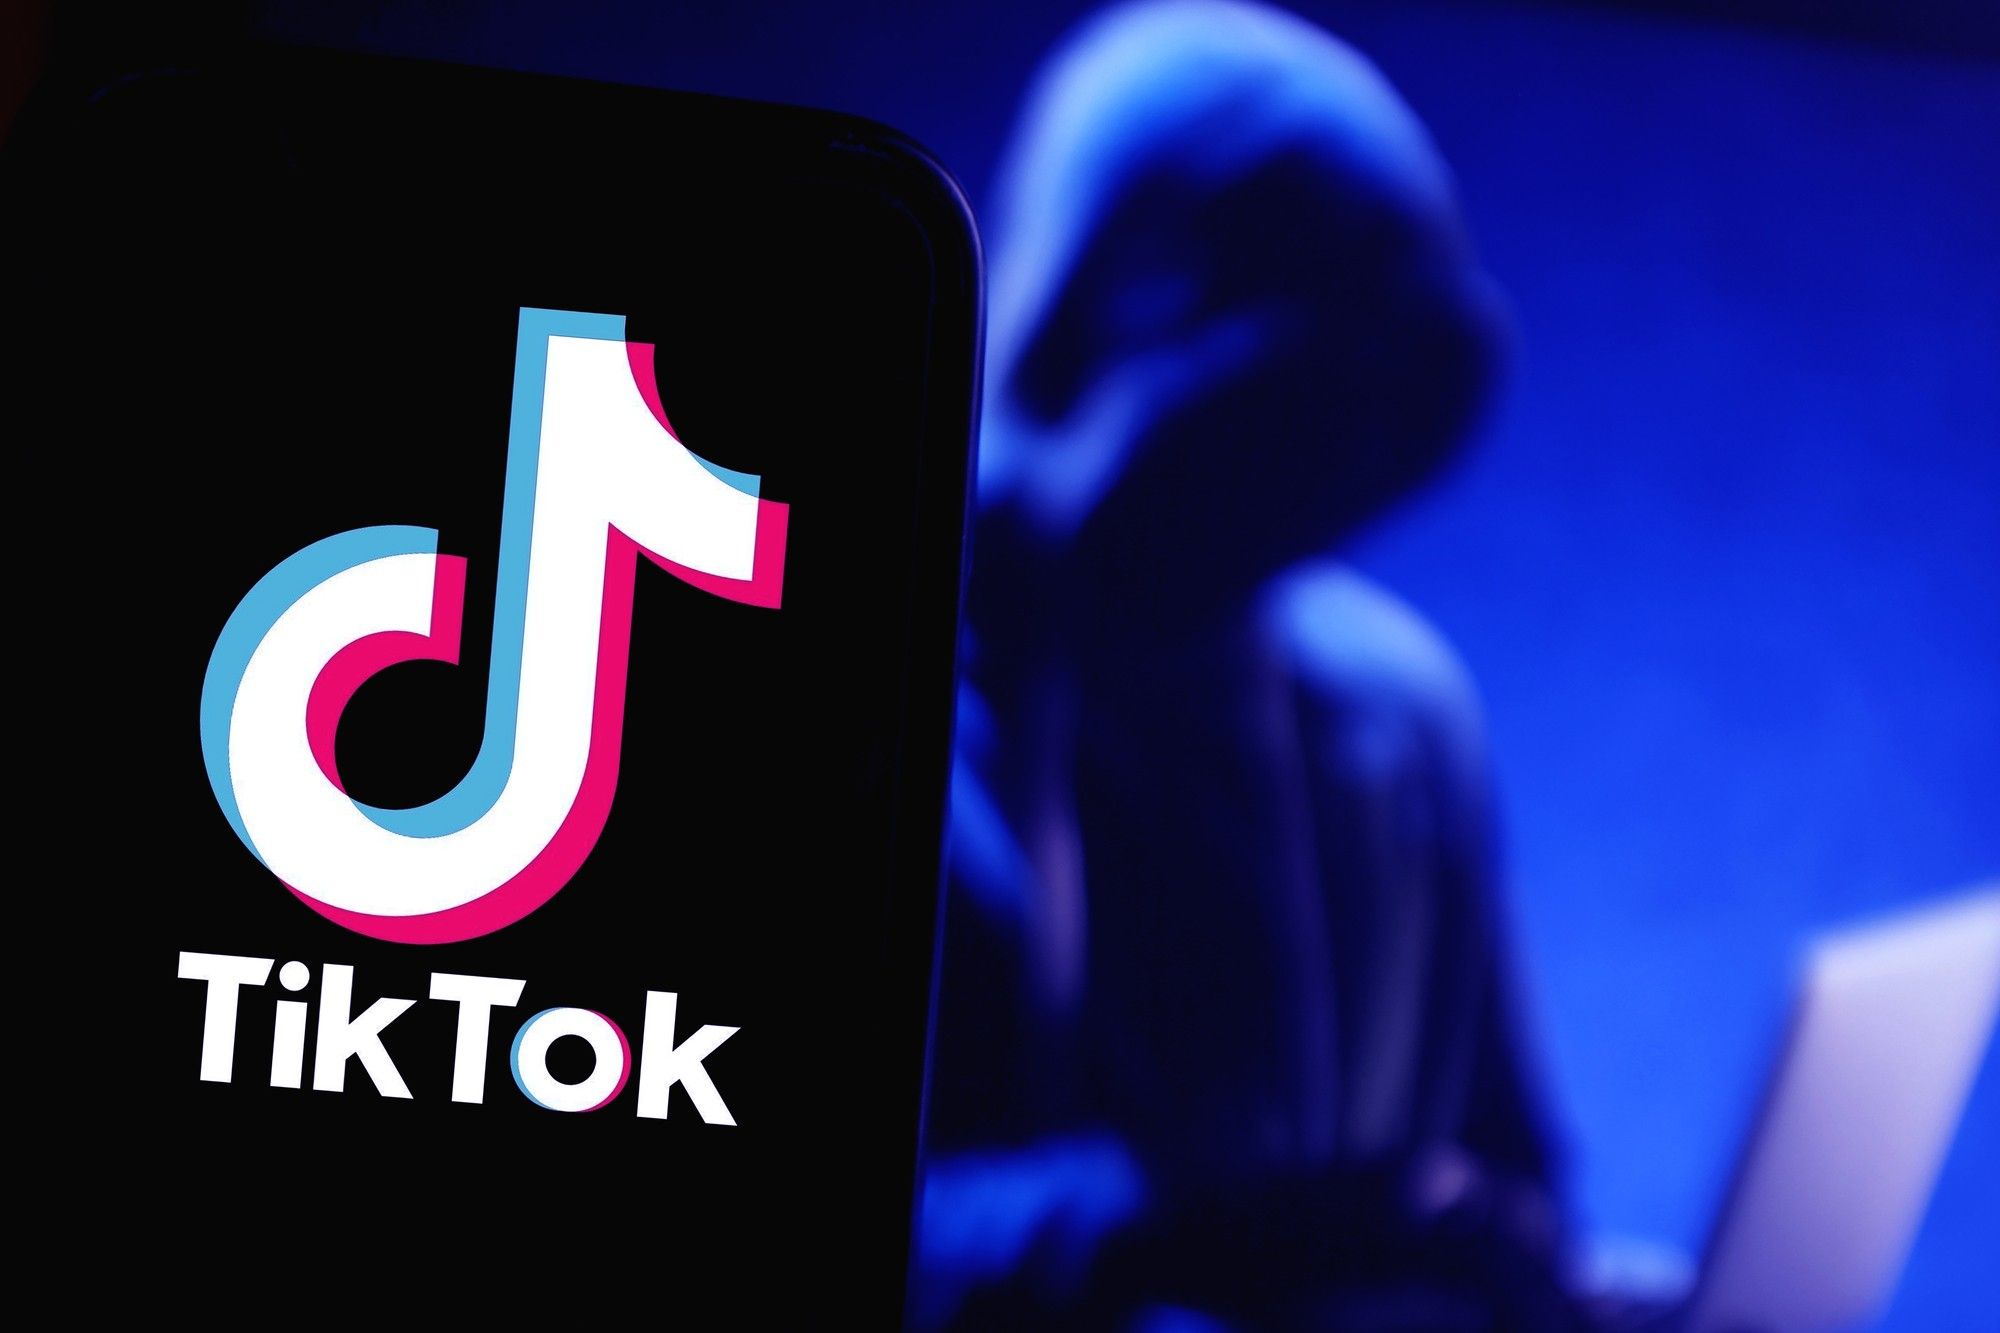 TikTok users may be at risk of security breaches.